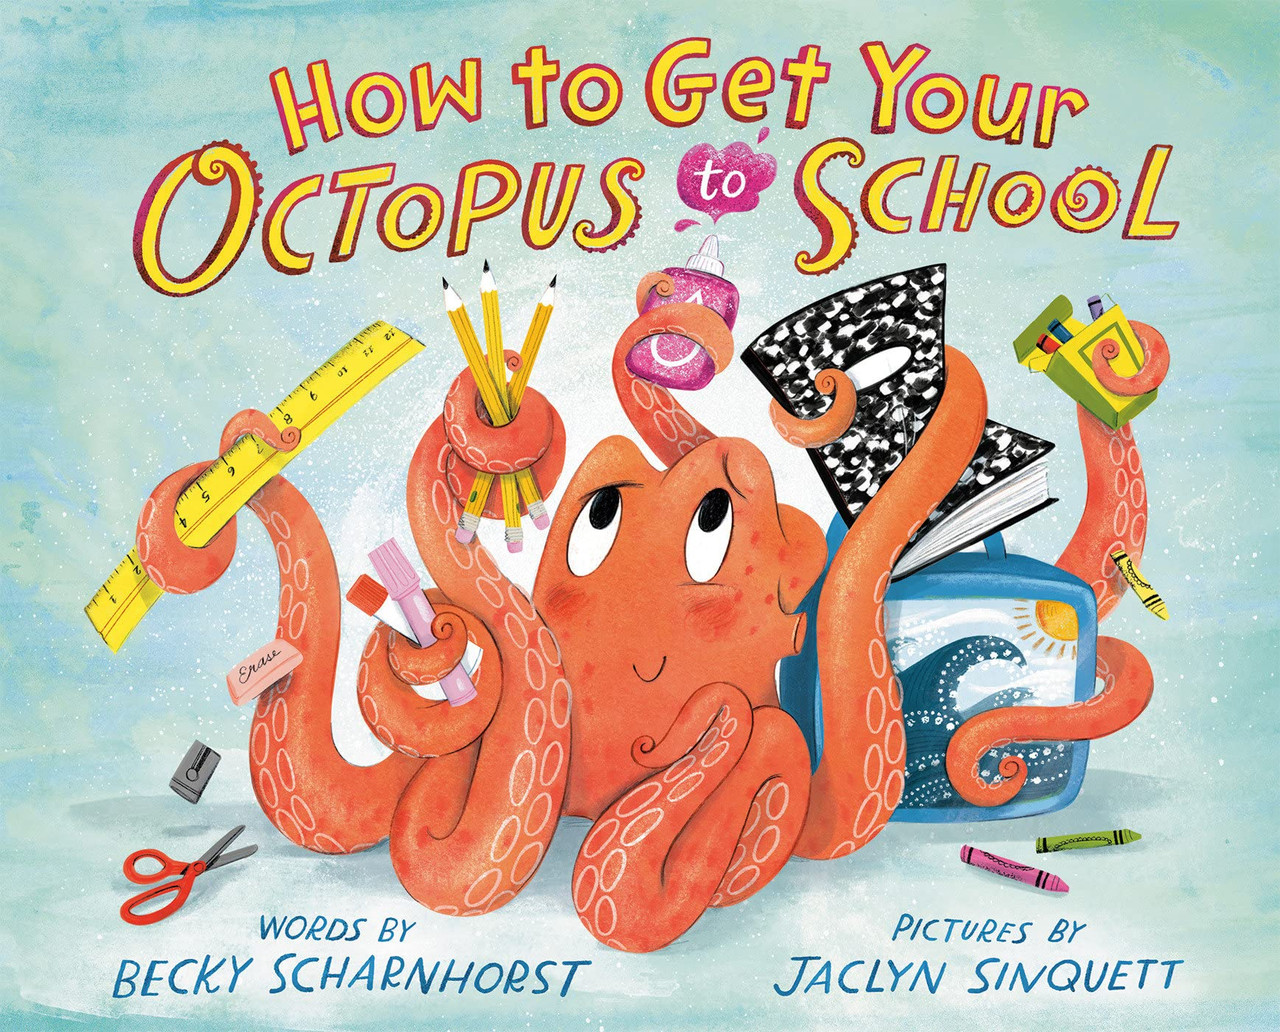 Image for "How to Get Your Octopus to School"